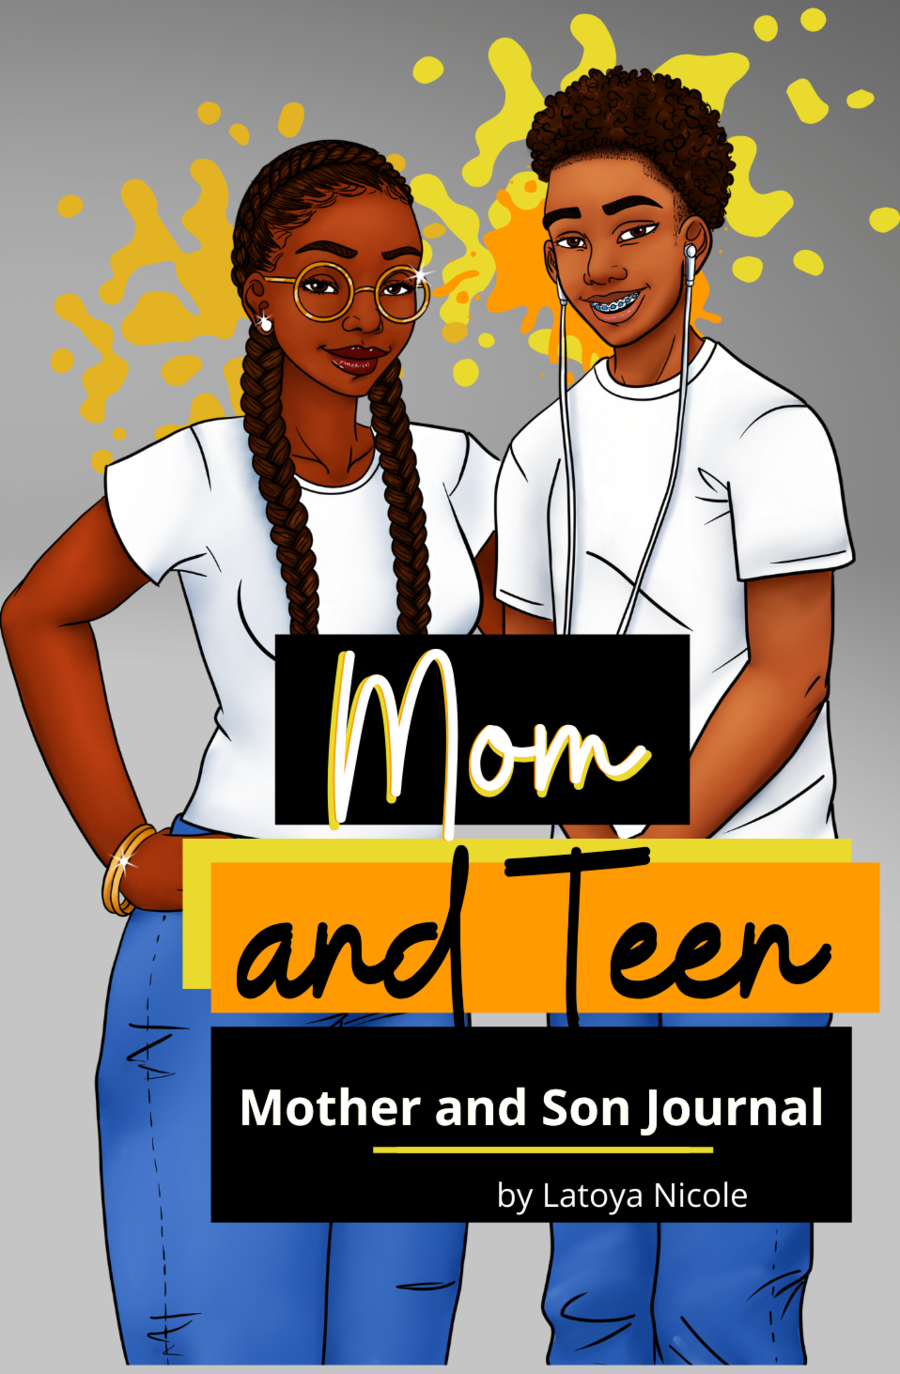 Mom and Teen Son Journal